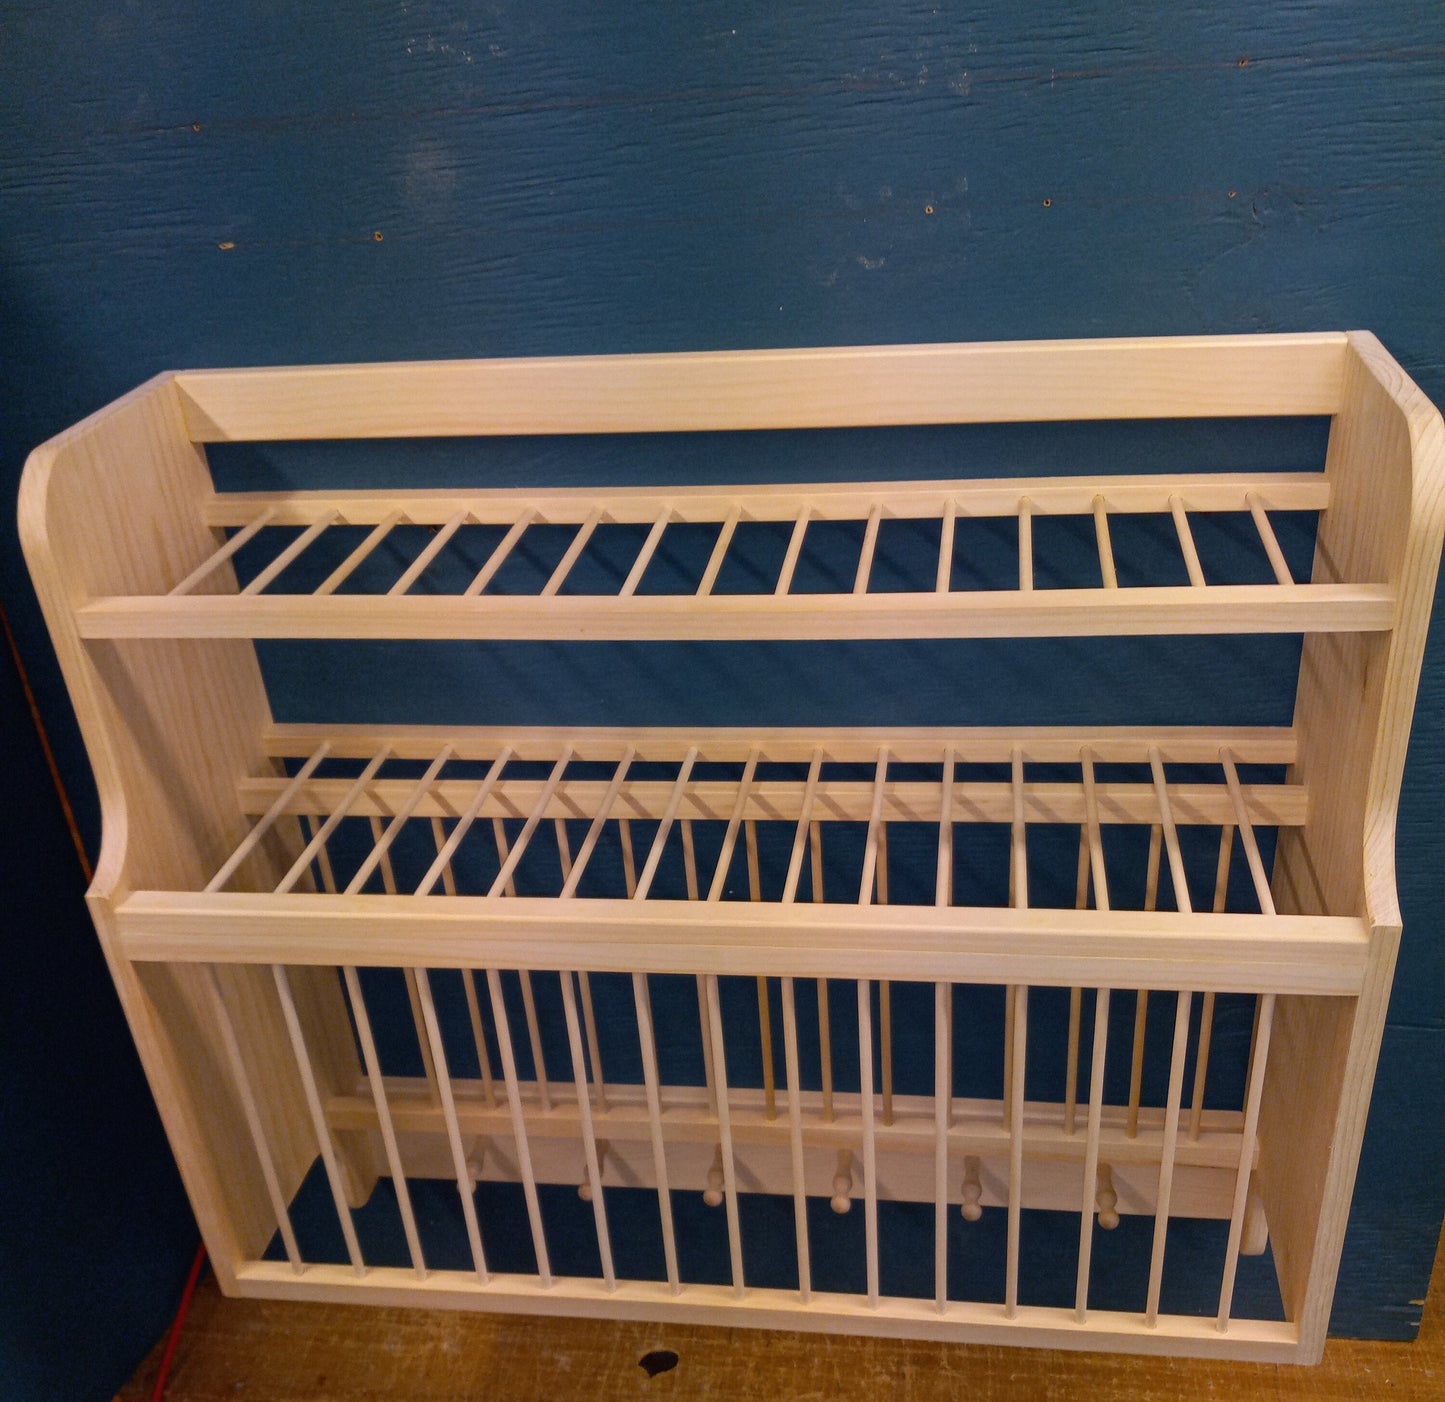 New unfinished Antique Style London dish drying Plate rack shelf cabinet with shaker pegs great storage for kitchen